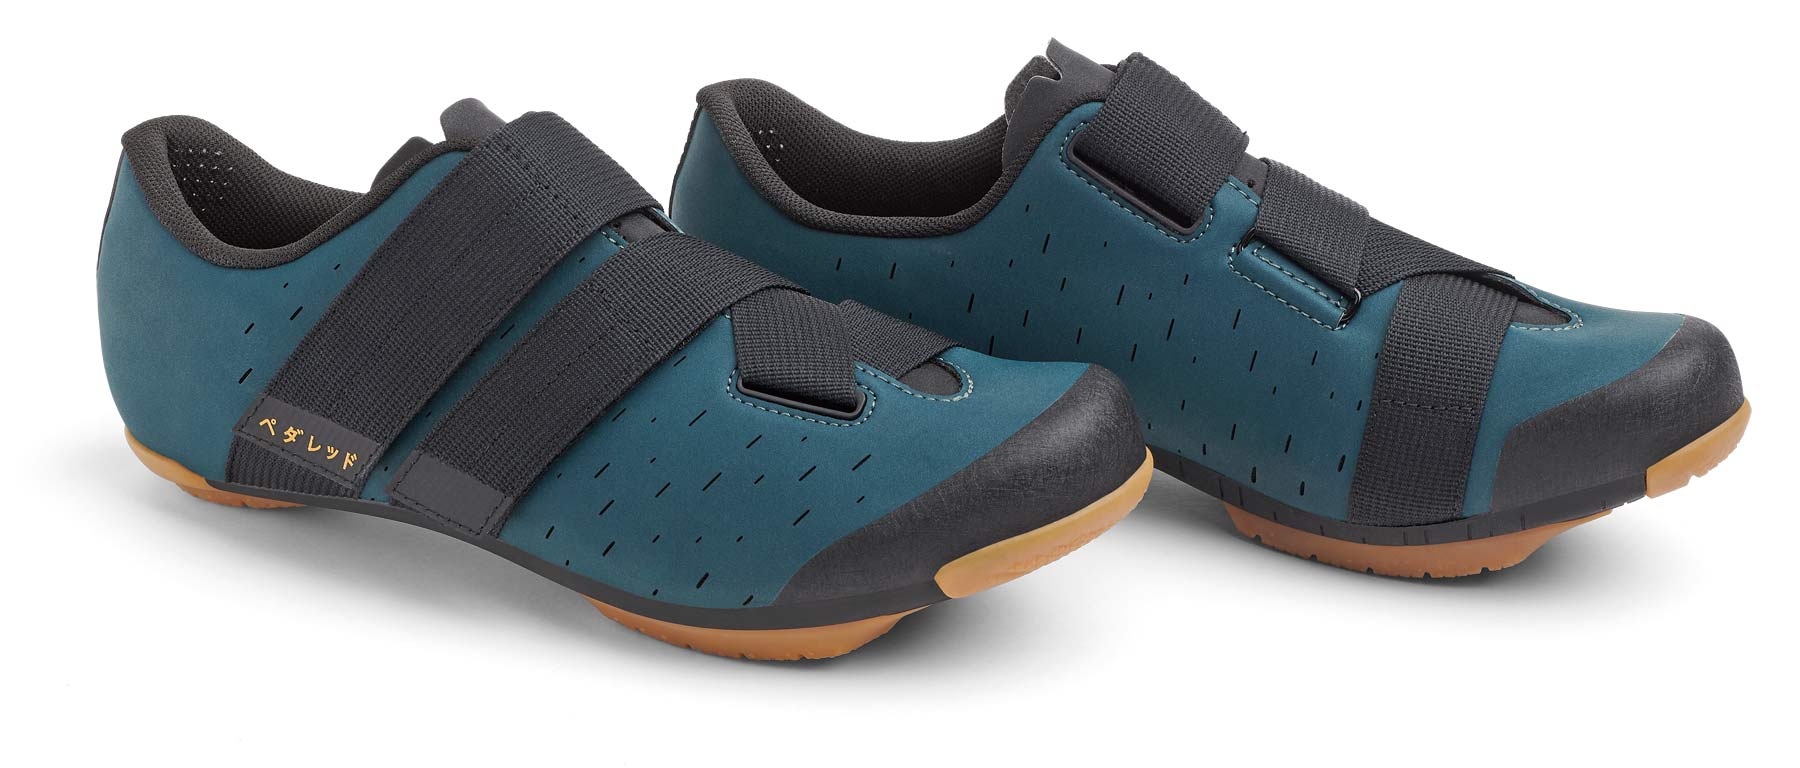 PEdALED Jary Terra gravel shoes, special edition Fizik Terra Powerstrap X4 gravel bike shoes